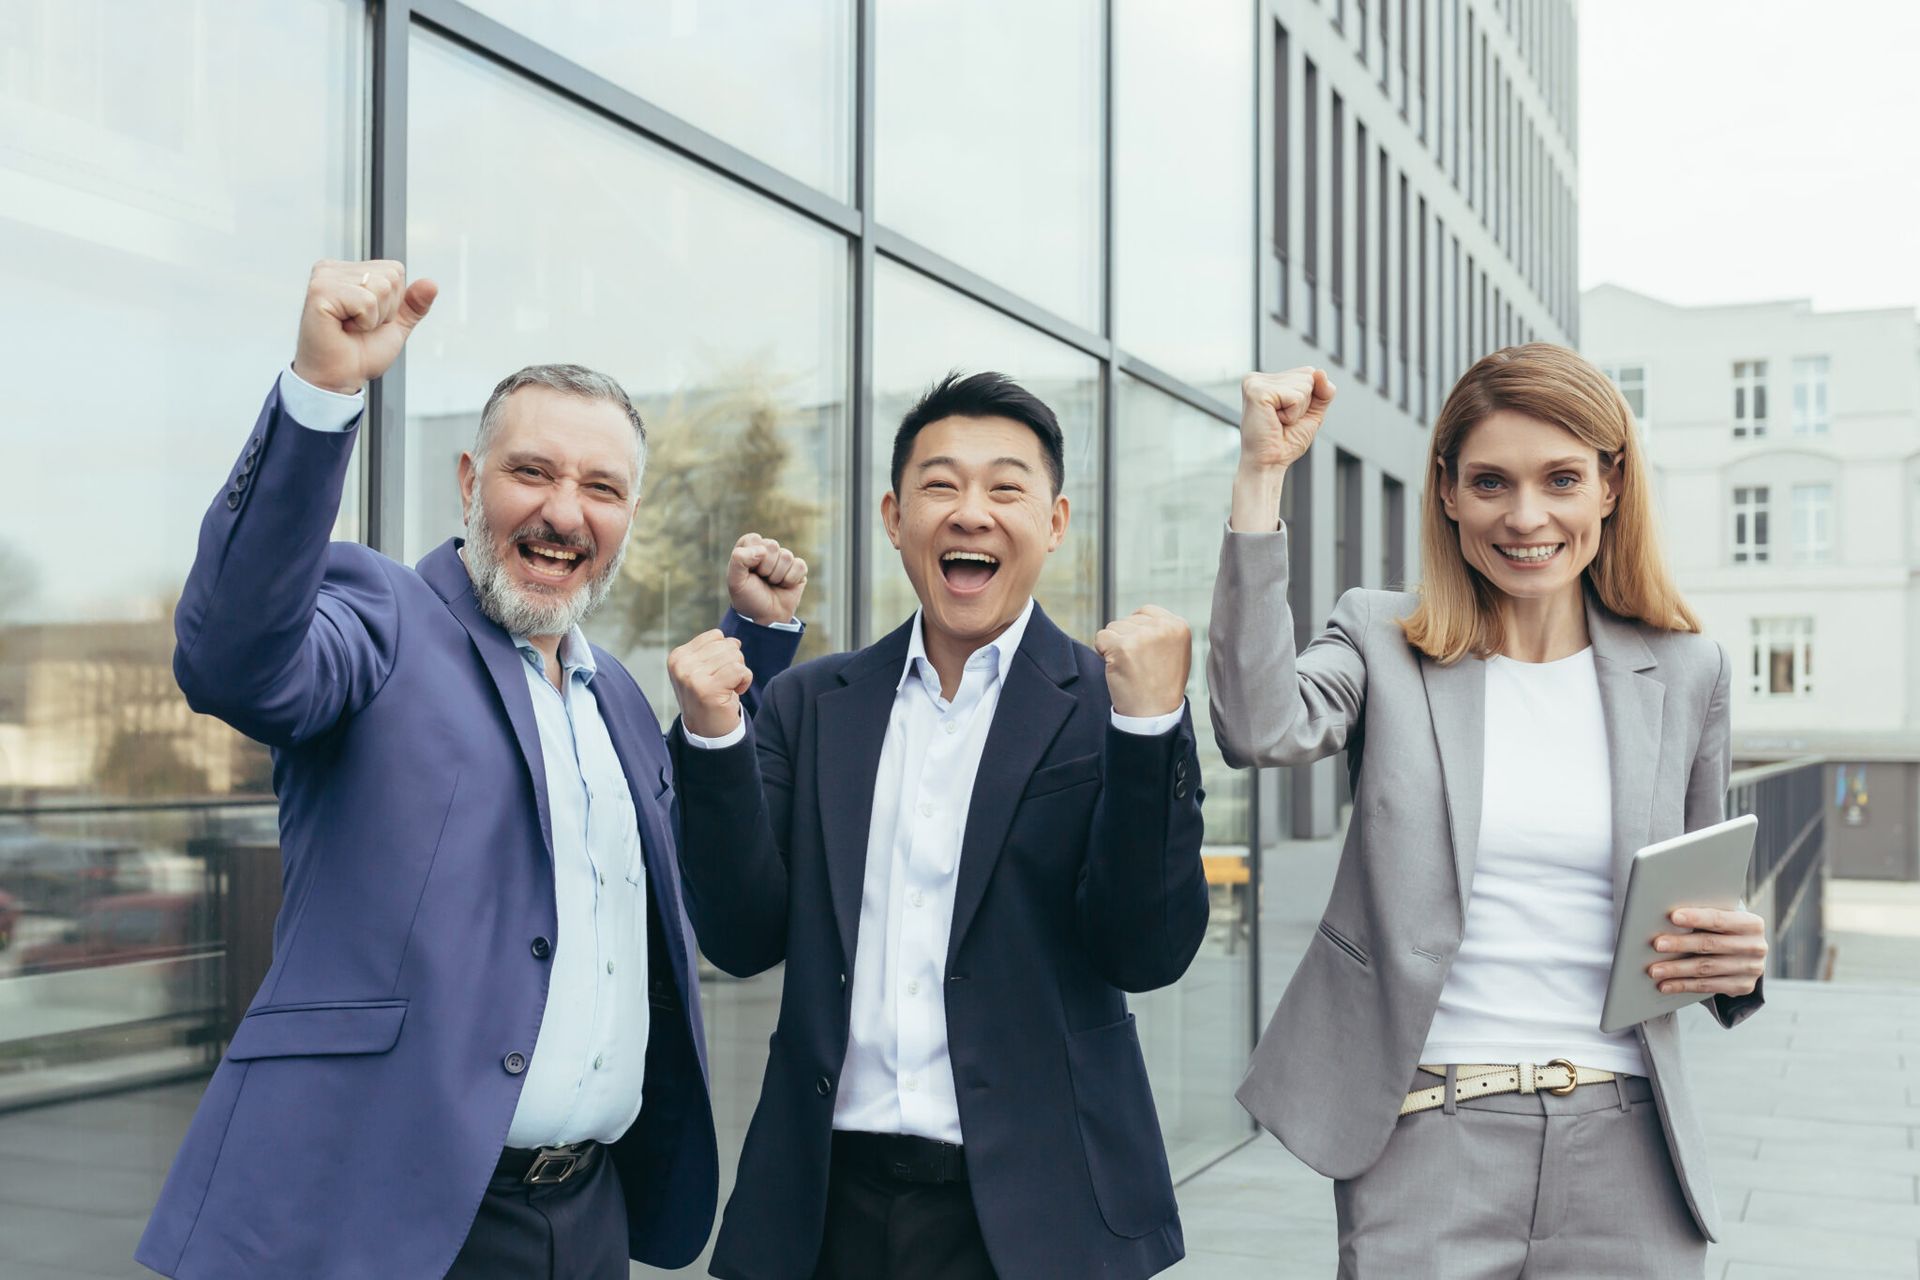 Business People With Their Hands in the Air - Chula Vista, CA - The Pivotal Group